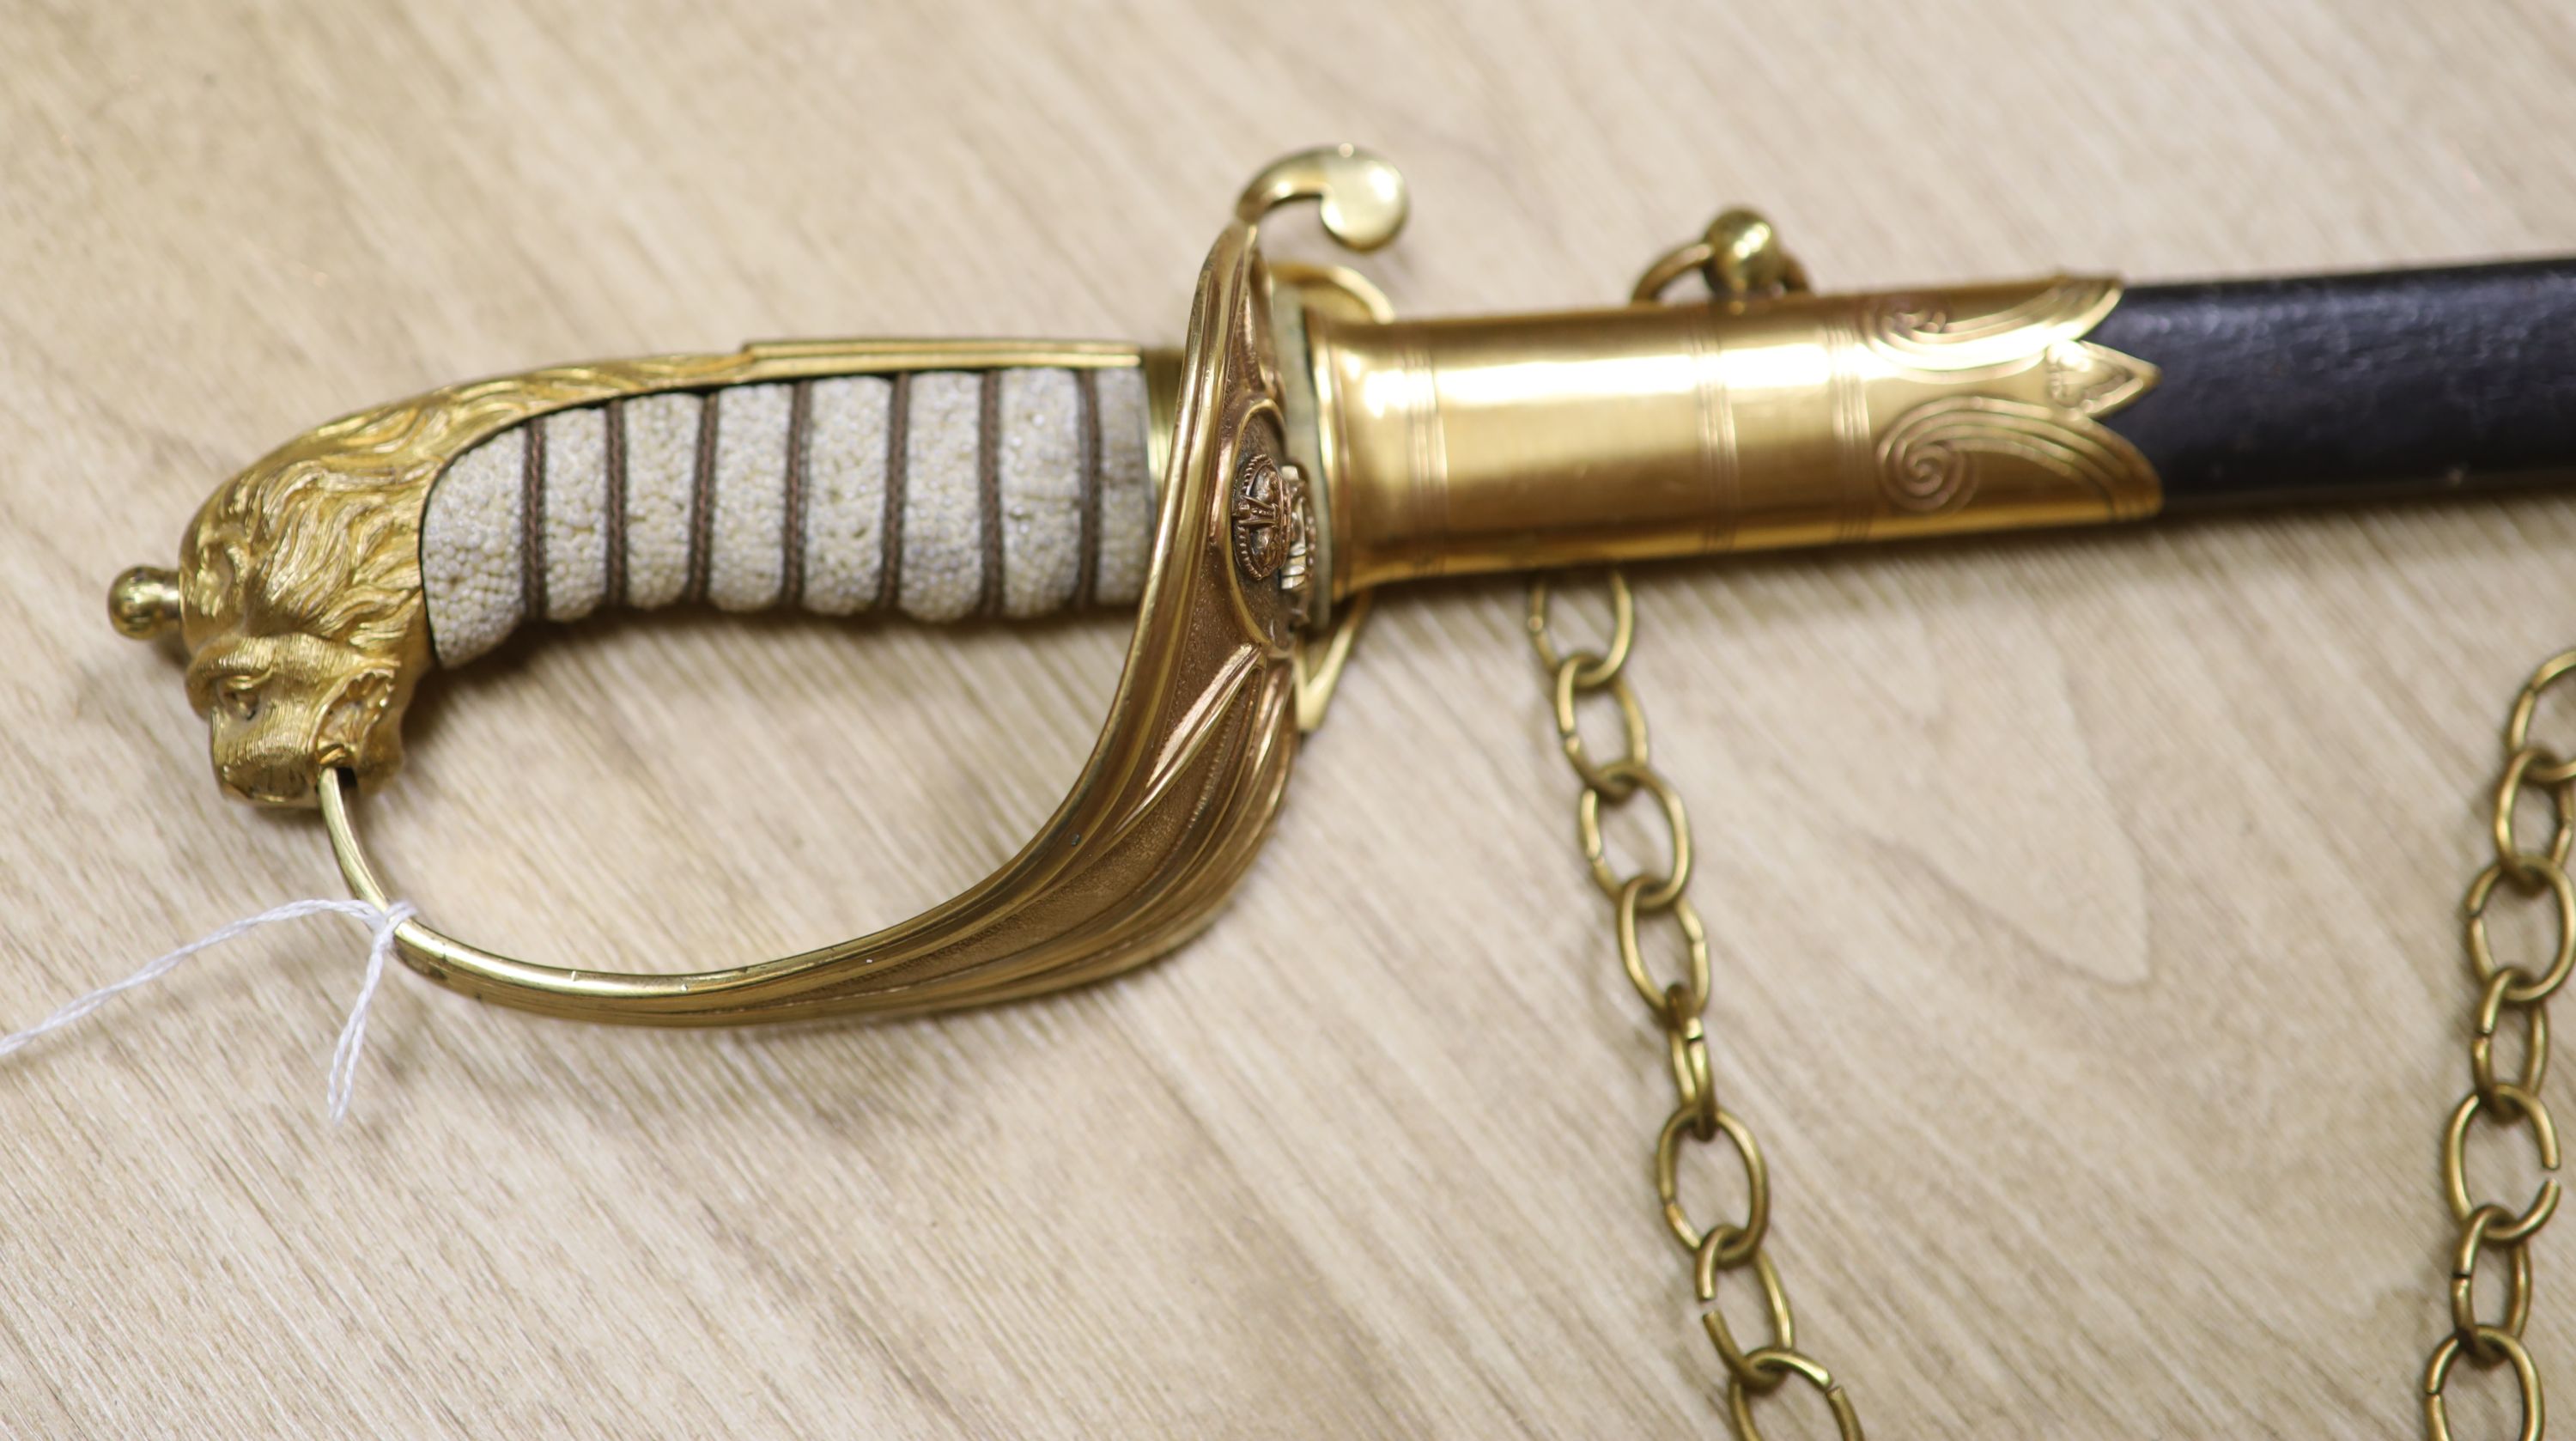 A late Naval Officers sword